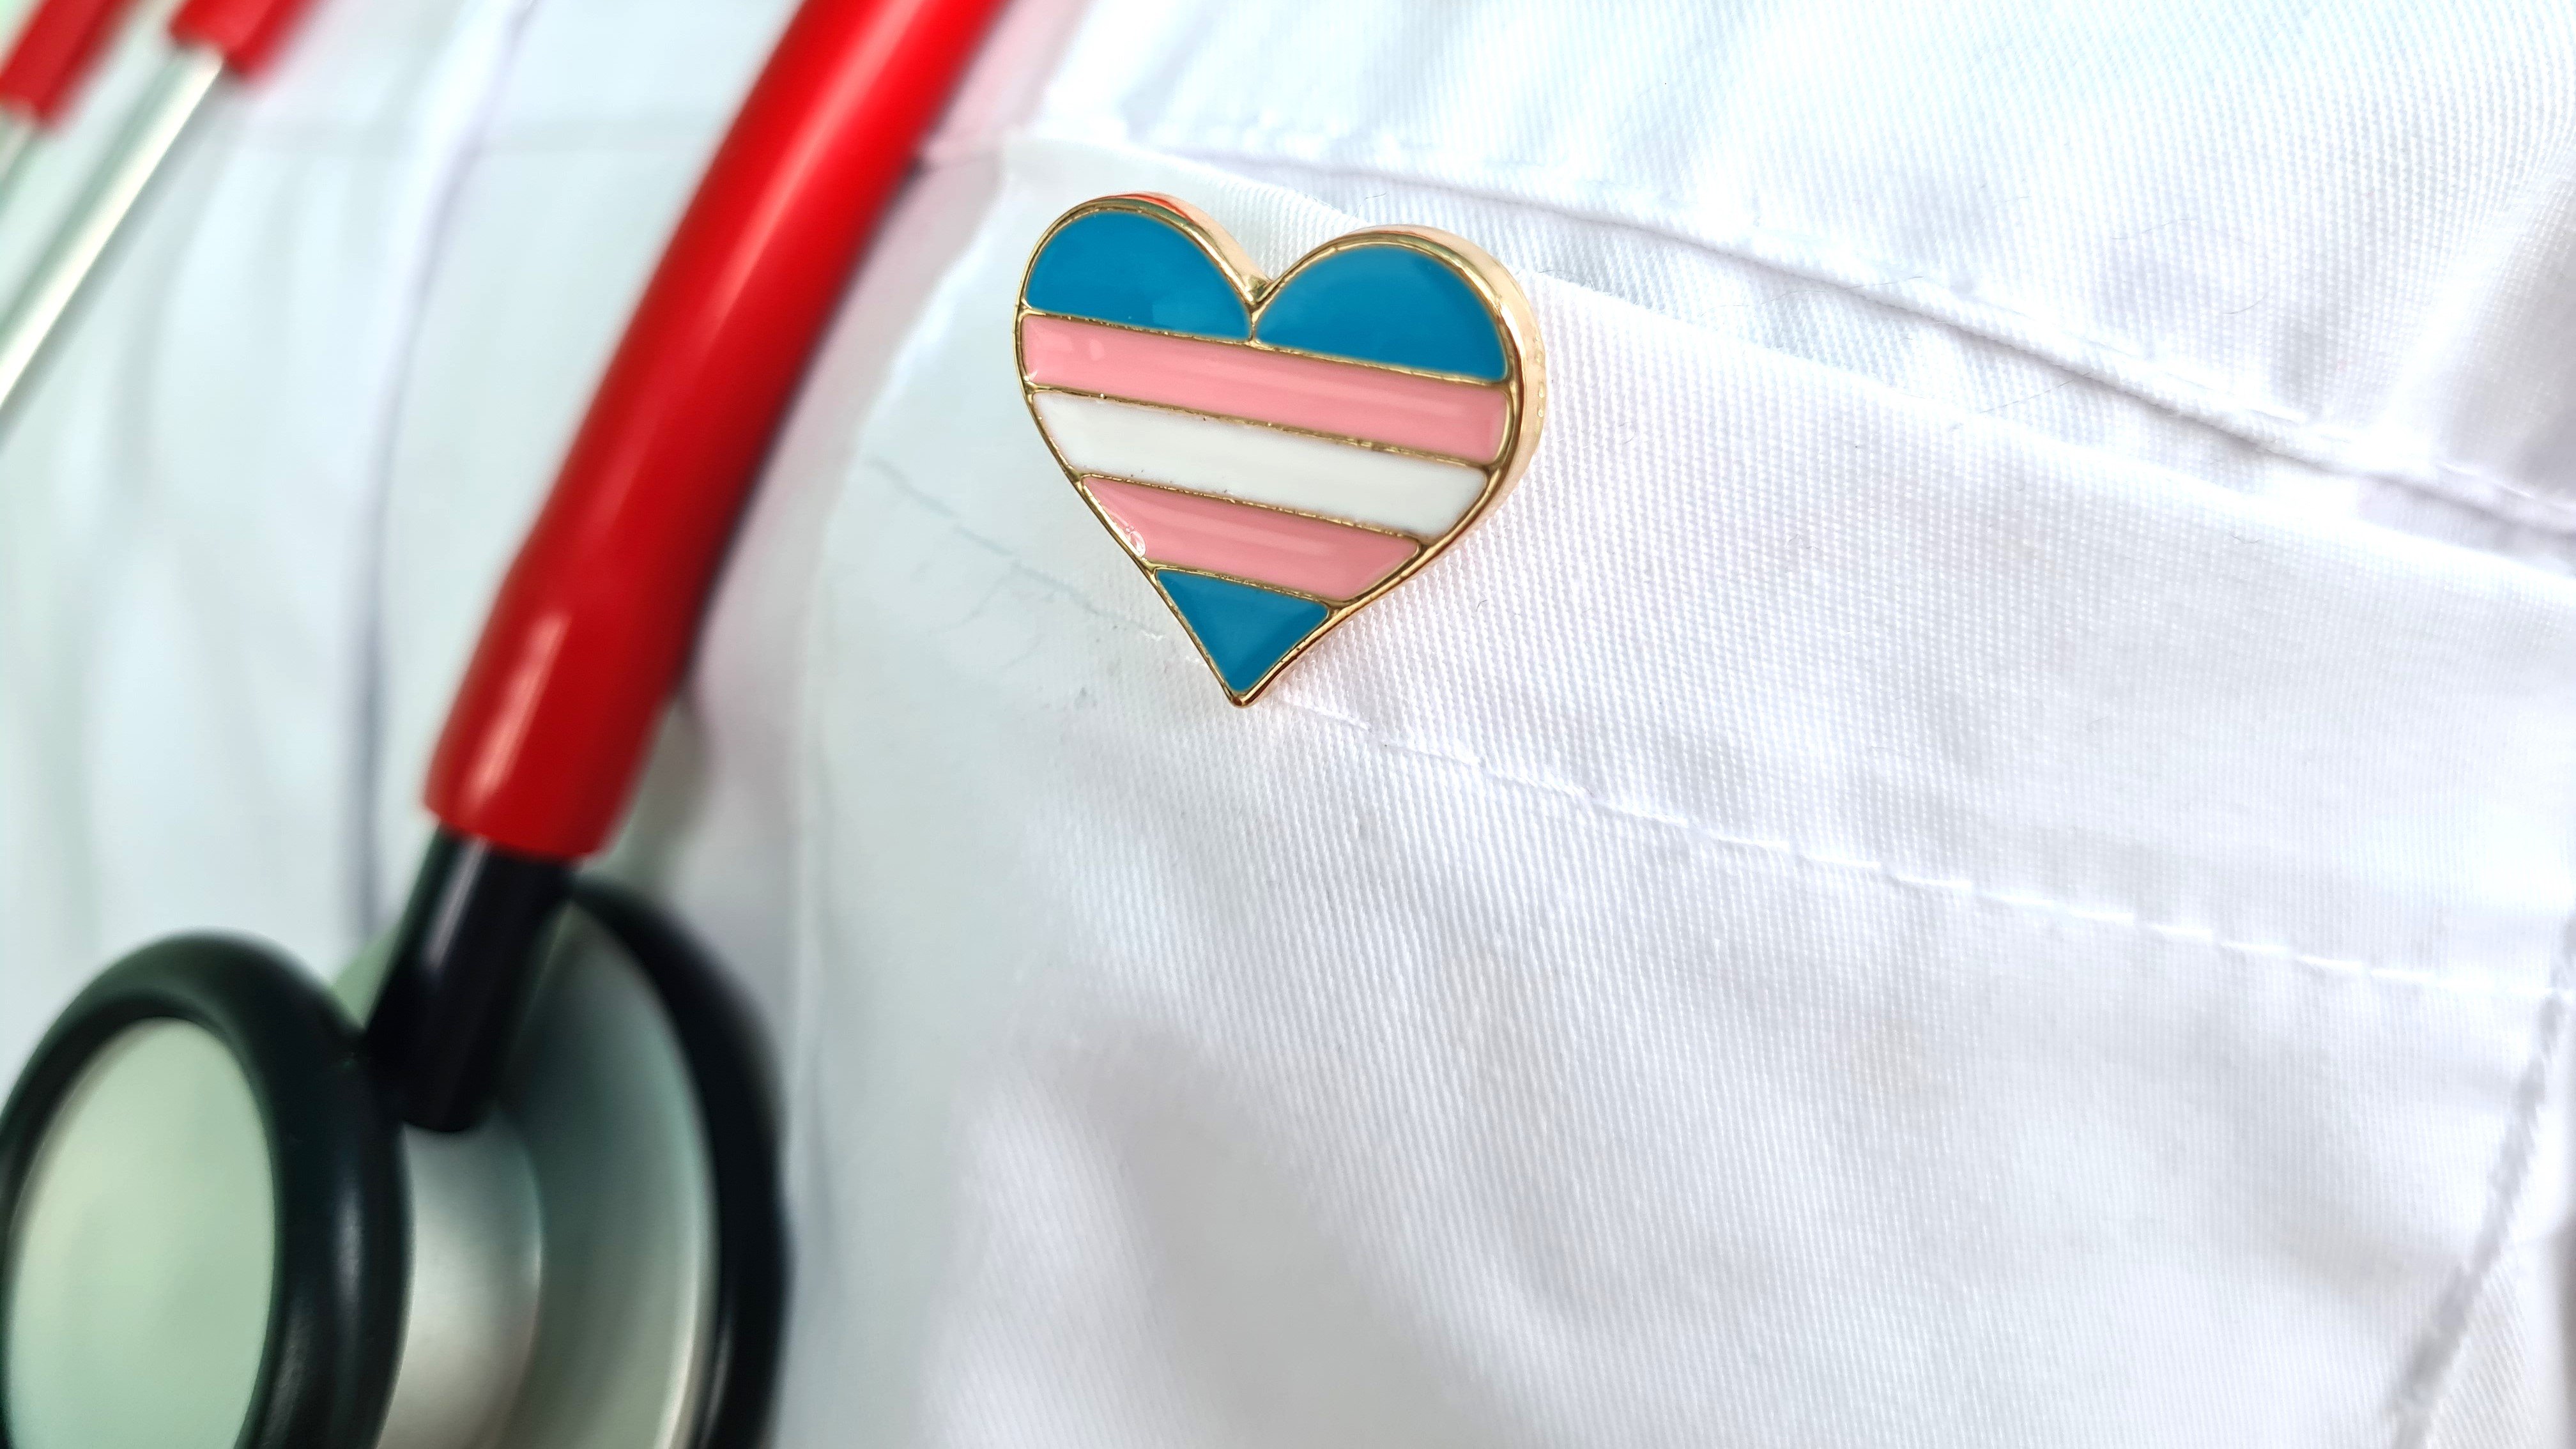 How providers are navigating Florida's new law restricting access to gender-affirming care